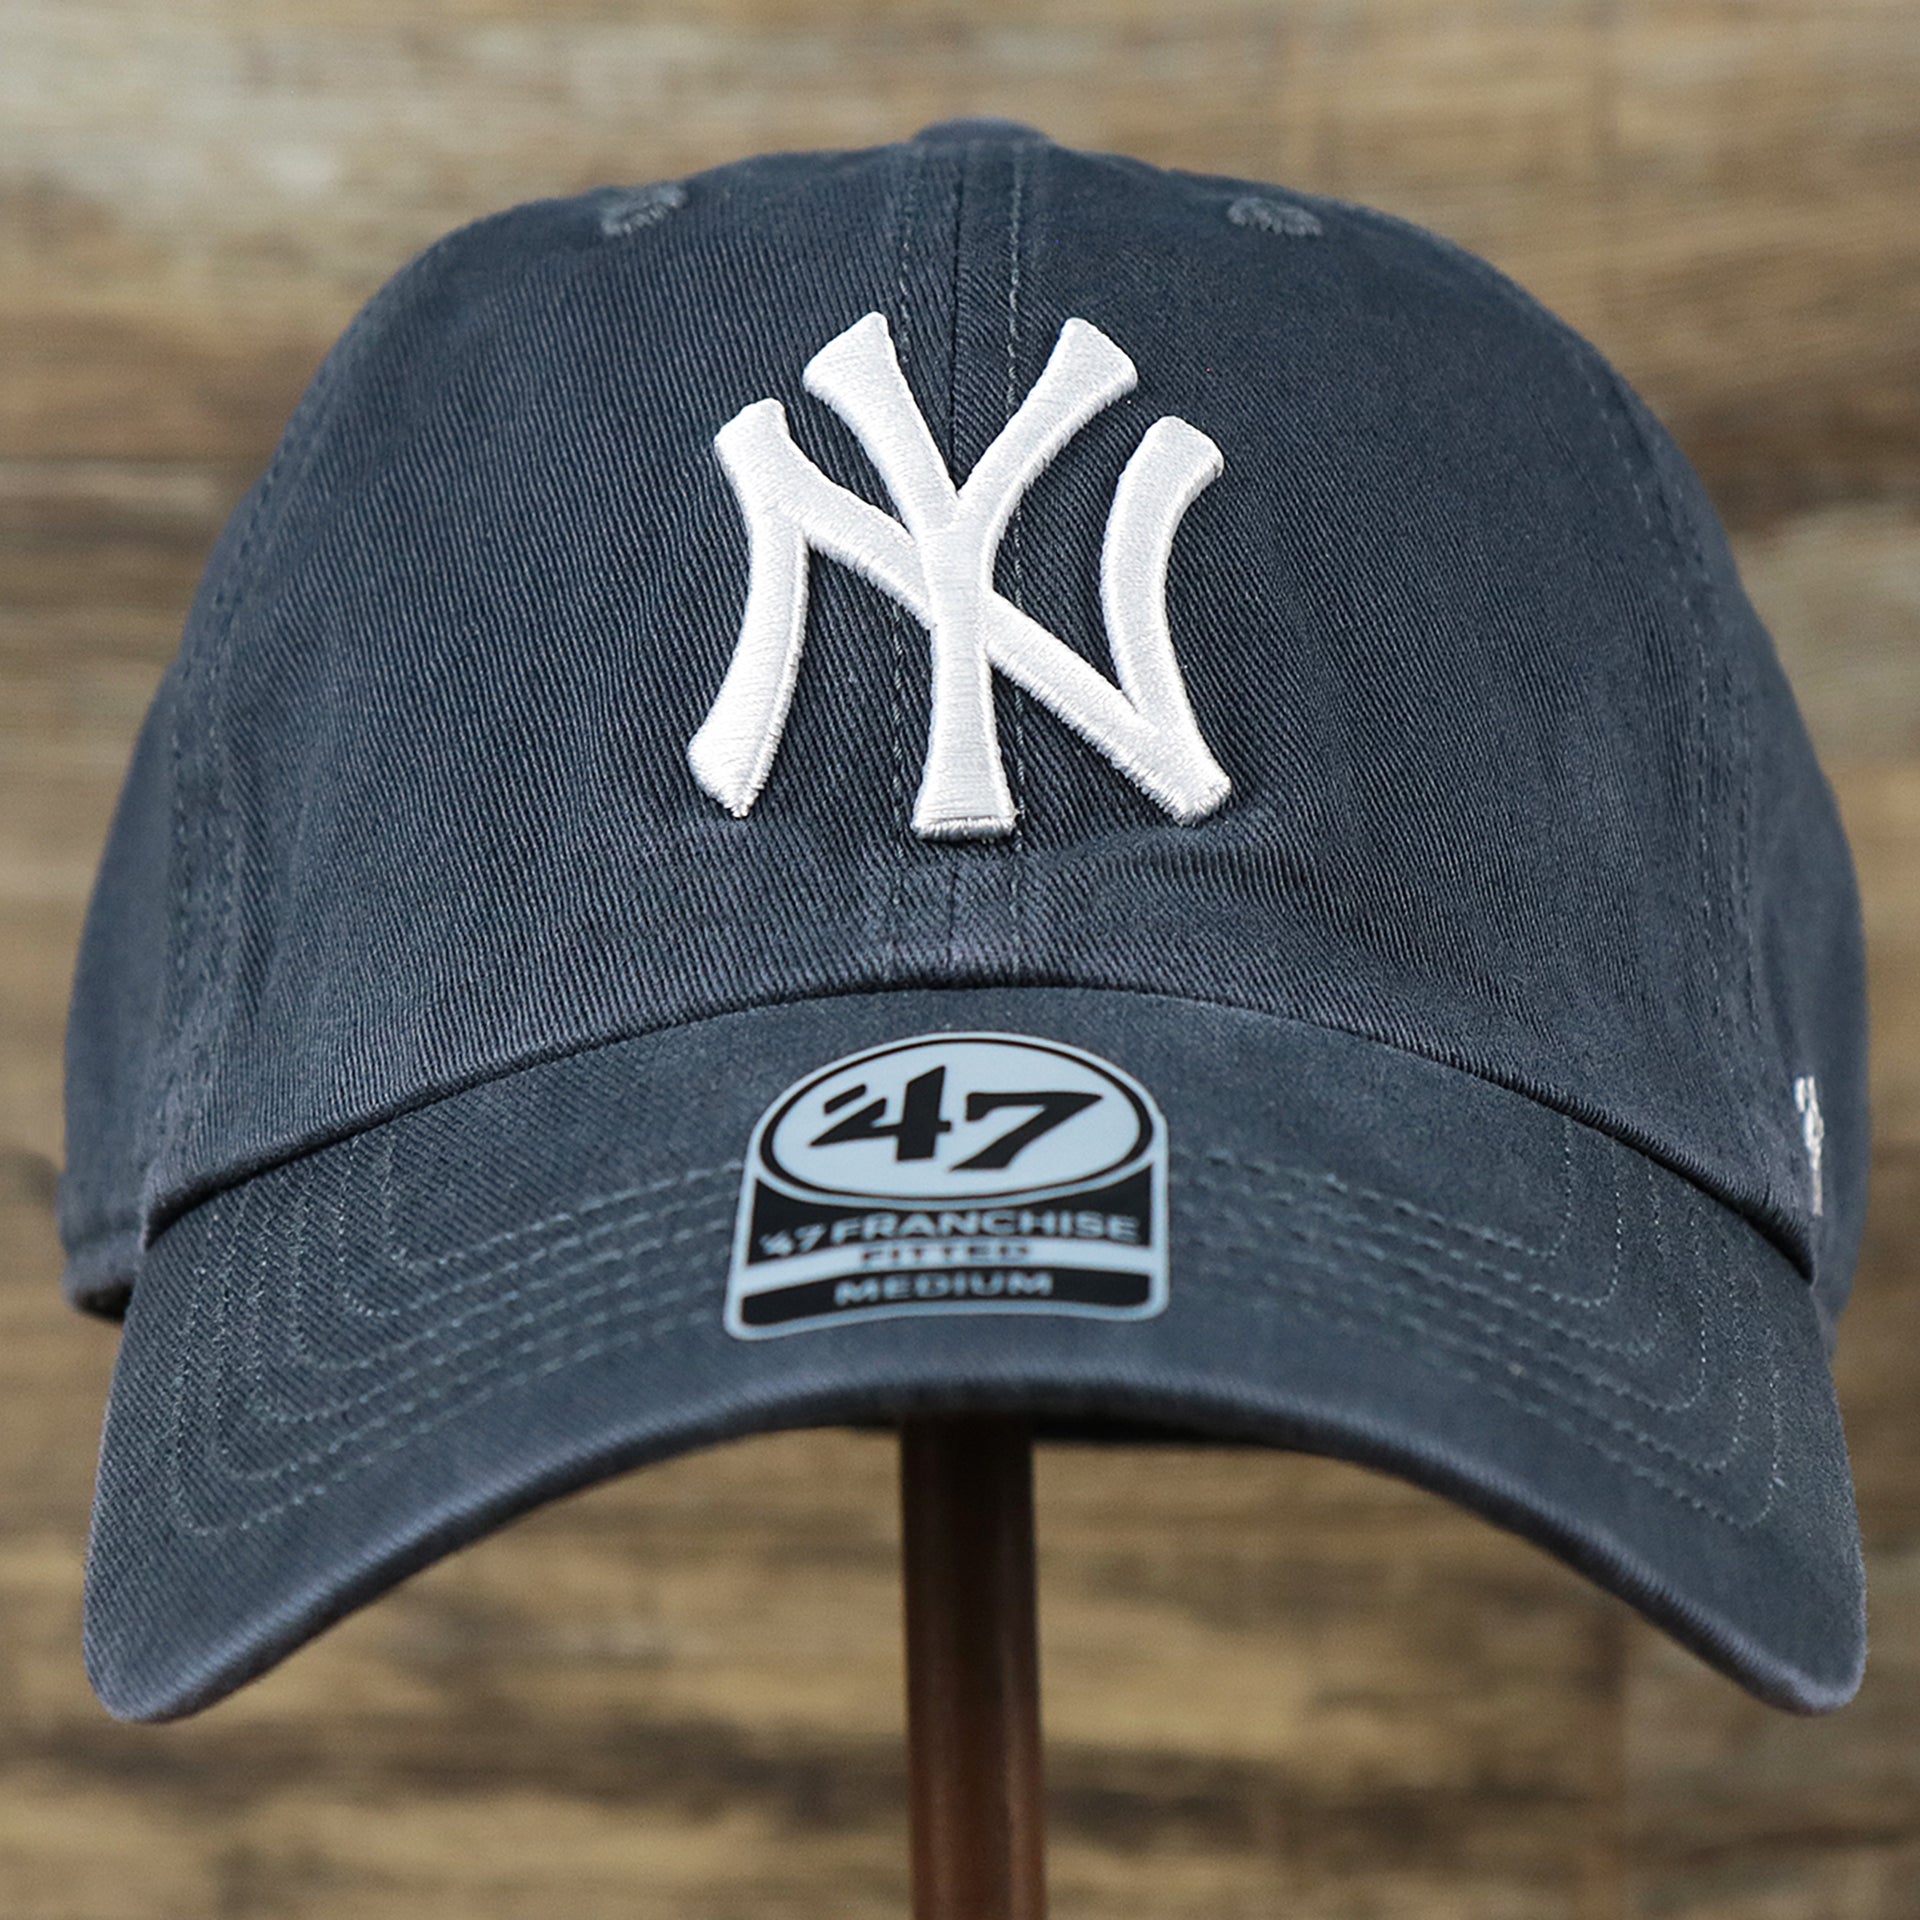 The front of the Cooperstown New York Yankees Green Bottom Yankees Wordmark Fitted Cap | Vintage Navy Fitted Cap